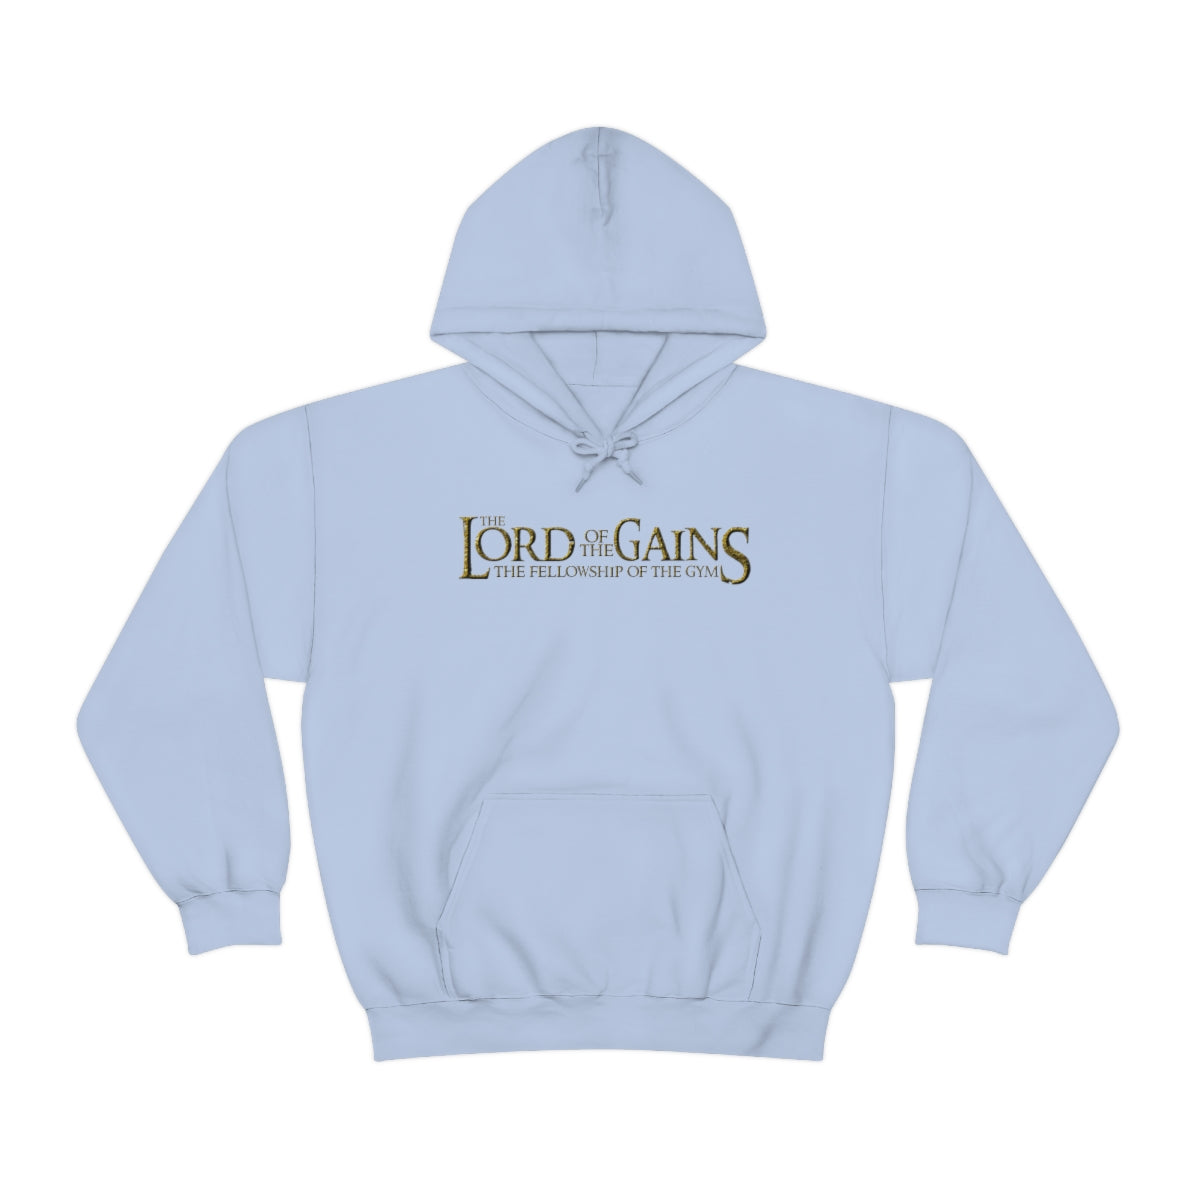 The Lord of the Gains Hoodie